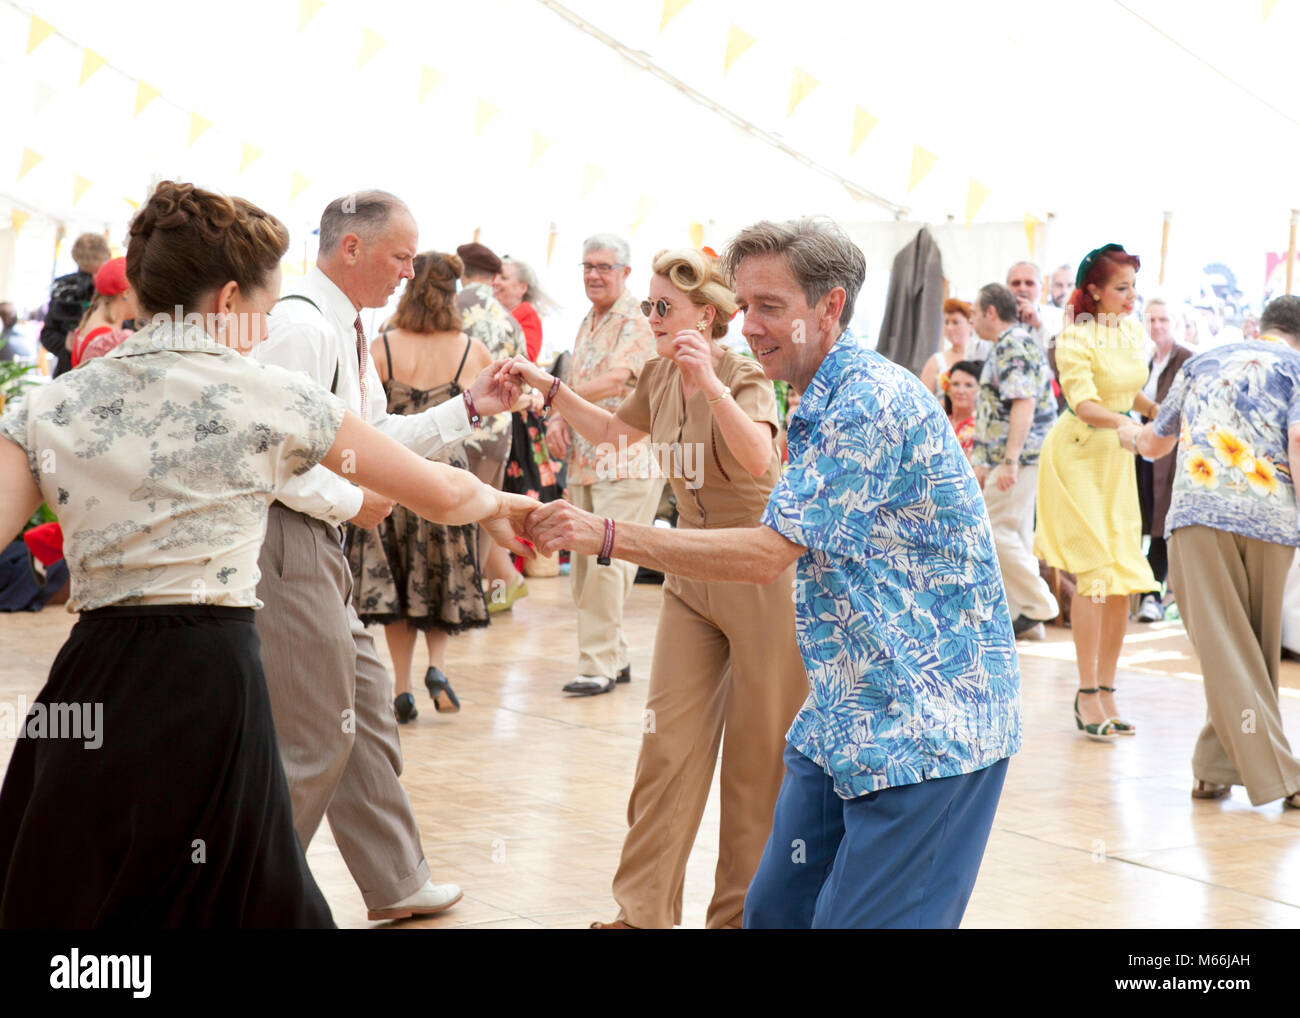 1950's dance at the Goodwood revival with vintage clothes brightly coloured shirts and dresses Stock Photo